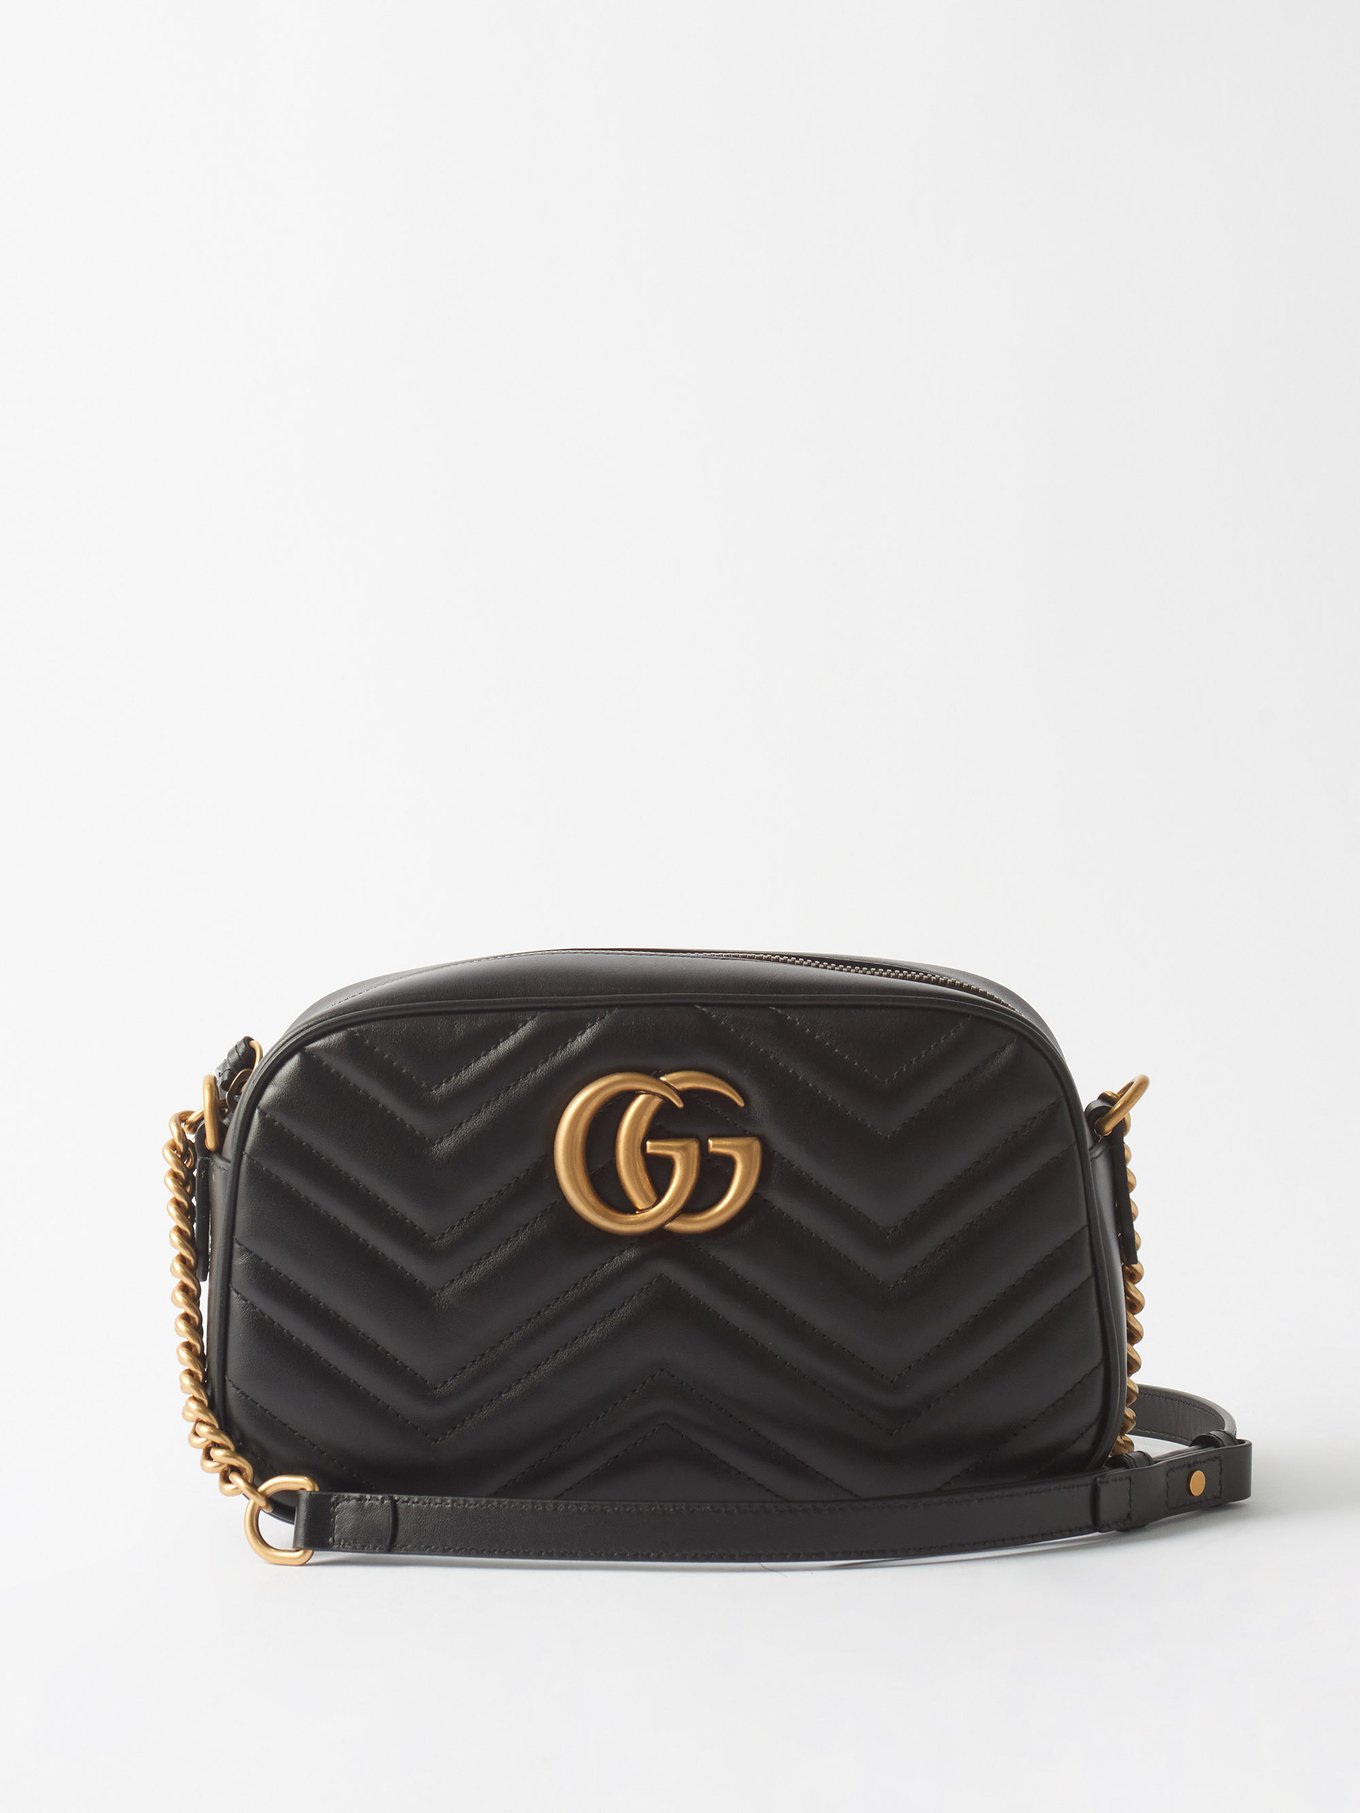 You can fit all your essentials in the Gucci Marmont Mini Camera Bag! , Gucci  Marmont Bag